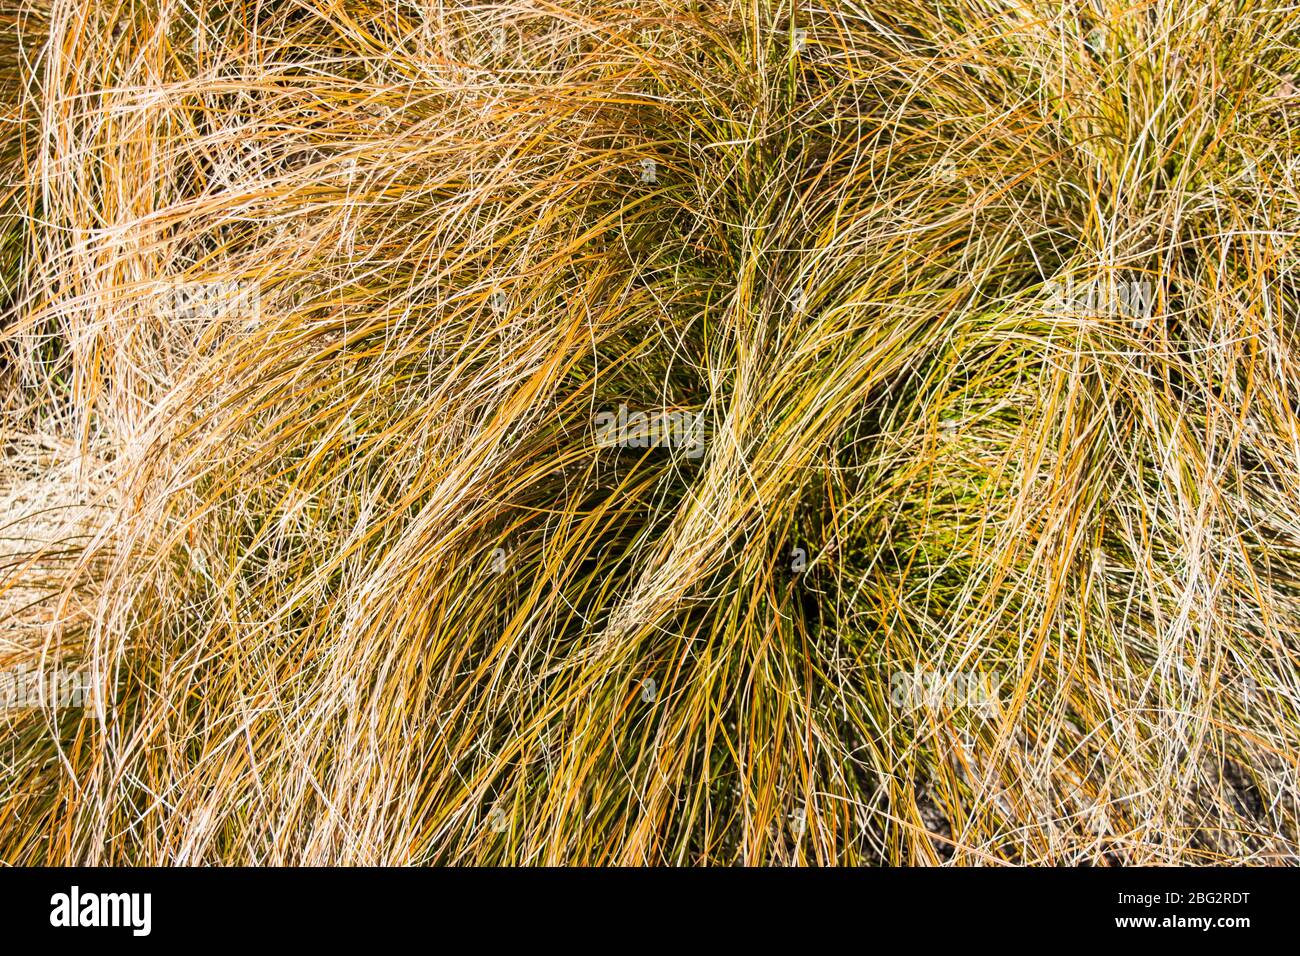 A close view of the tangled leaves of ornamental grass New Zealand Hair Sedge Carex testacea Stock Photo